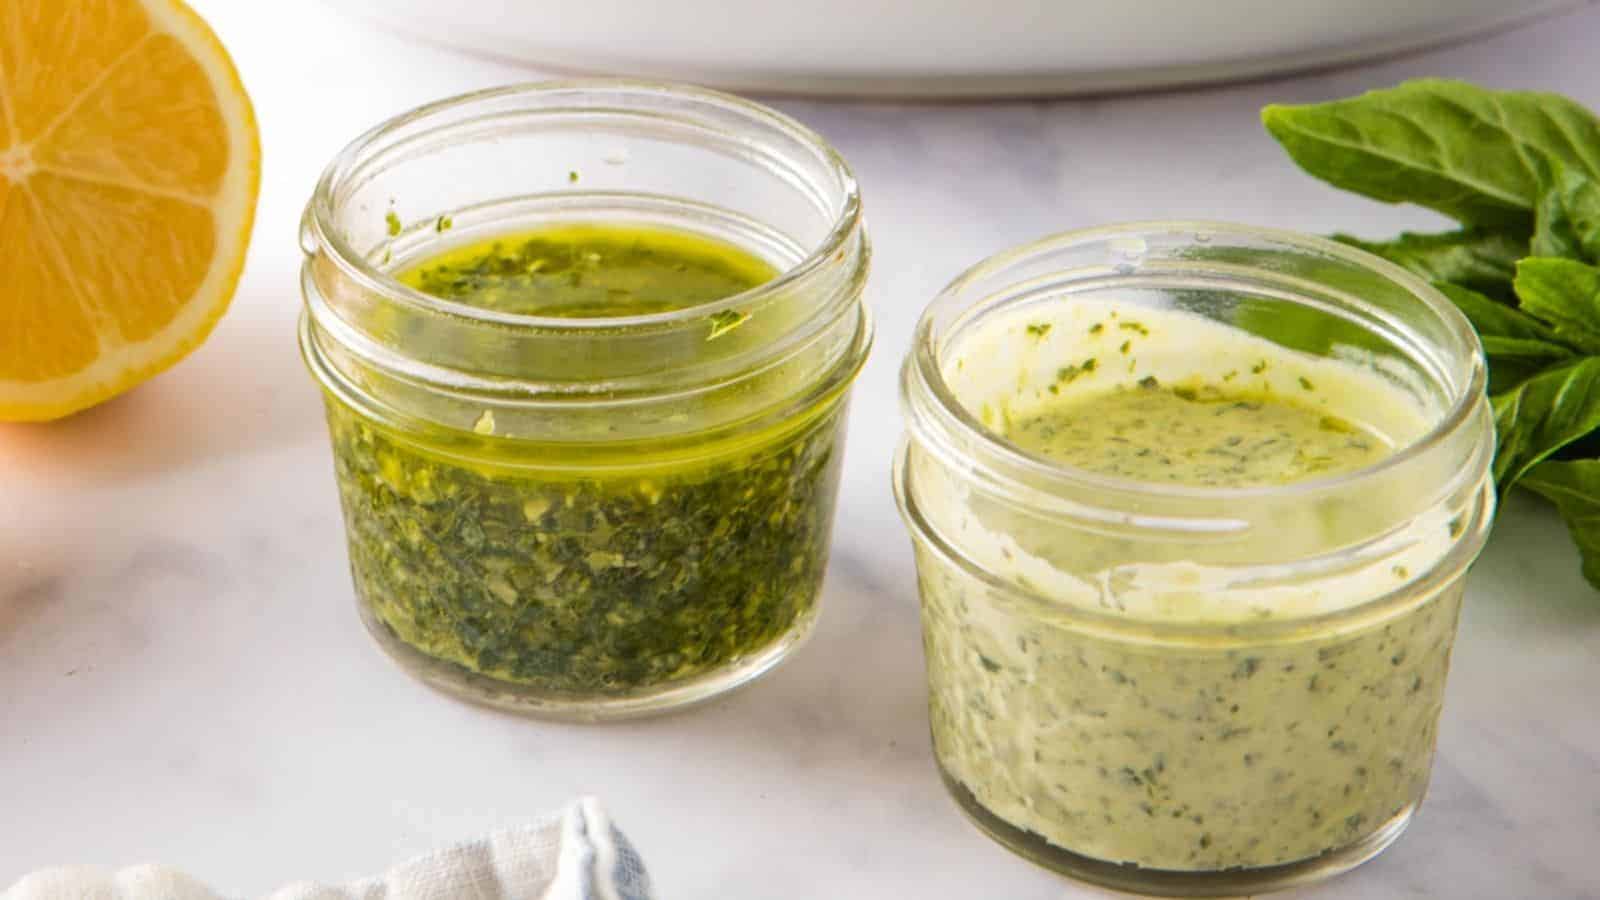 Two small glass jars filled with pesto salad dressings, one vinaigrette and one creamy, on a white marble surface.